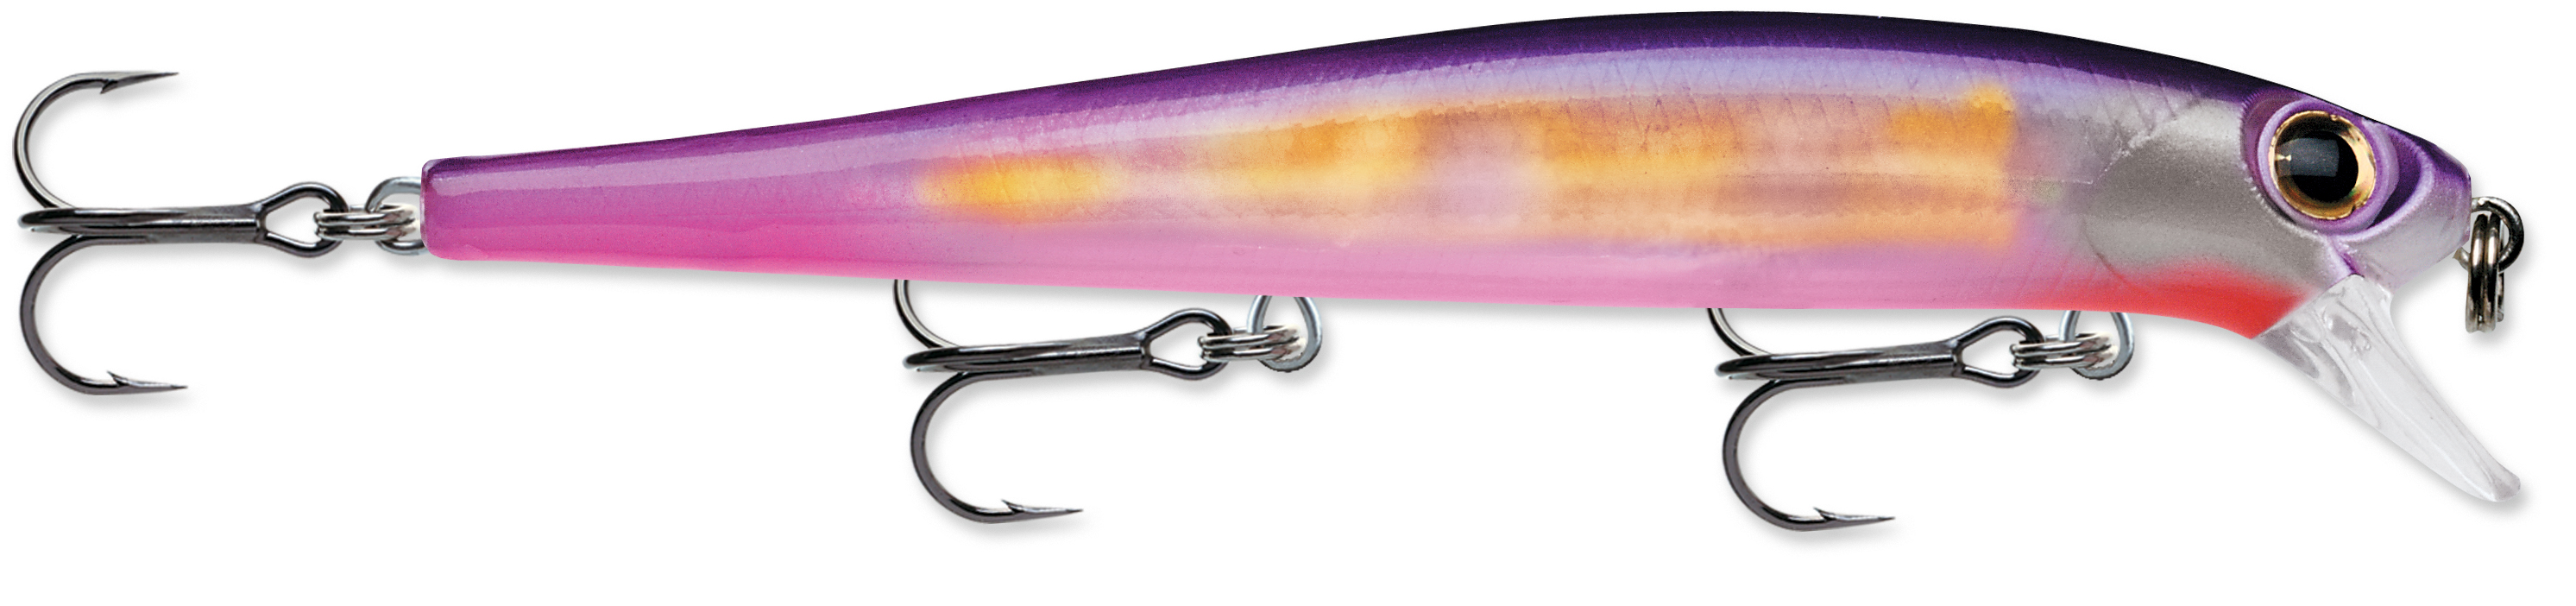 2 Storm Thunderstick Madflash Series Ajm653 Pink Fire UV Fishing Lures for  sale online